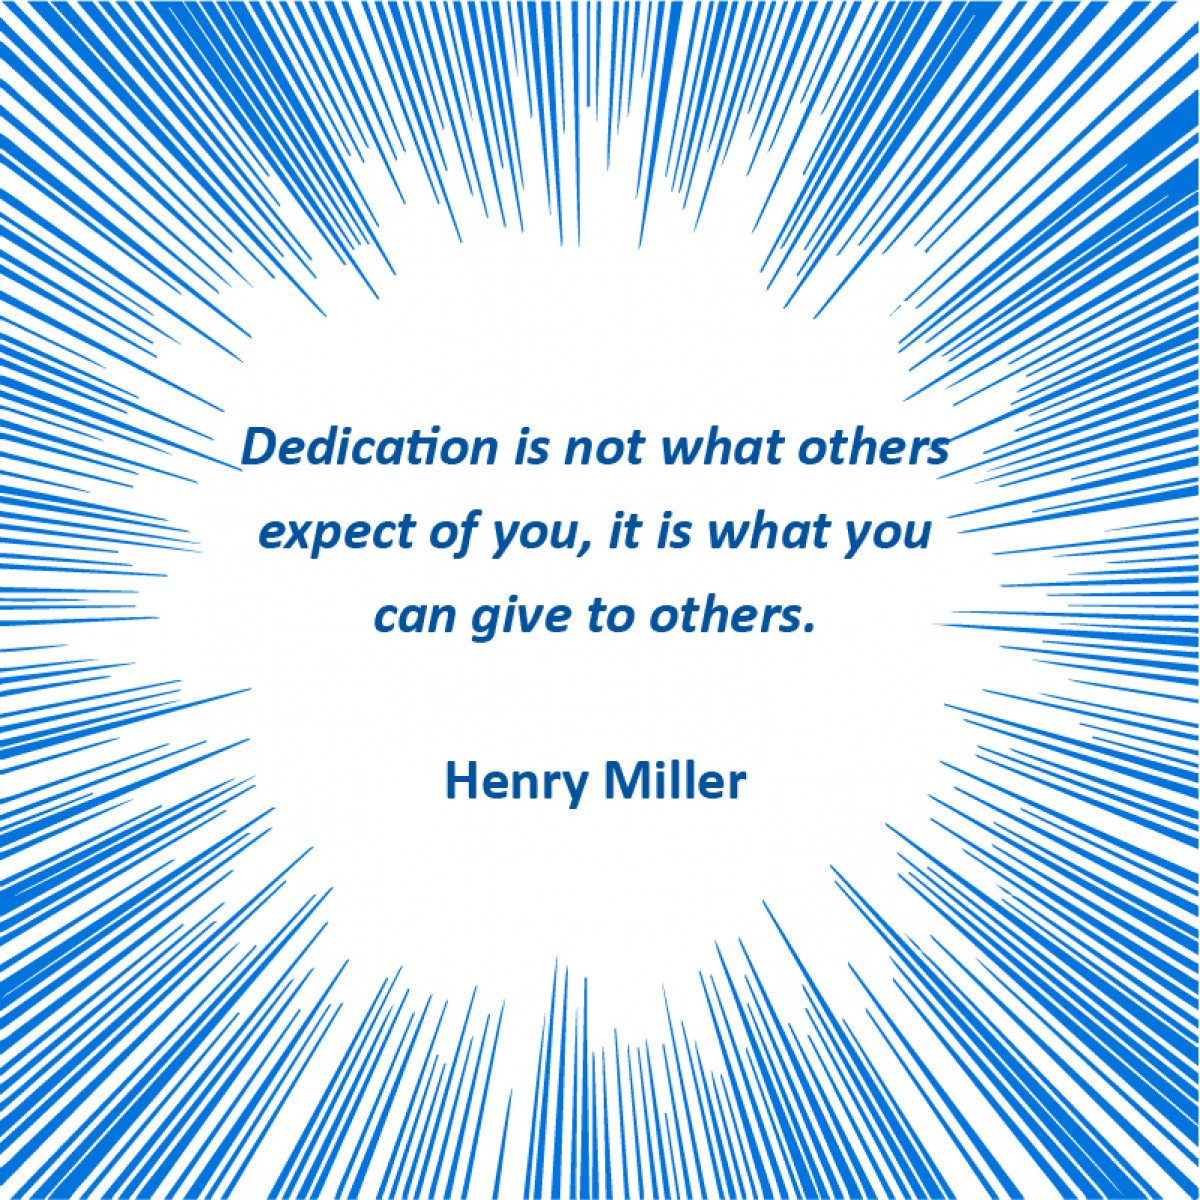 #Dedication is not what others expect of you, it is what you can give to others. #quote #quotemotivation